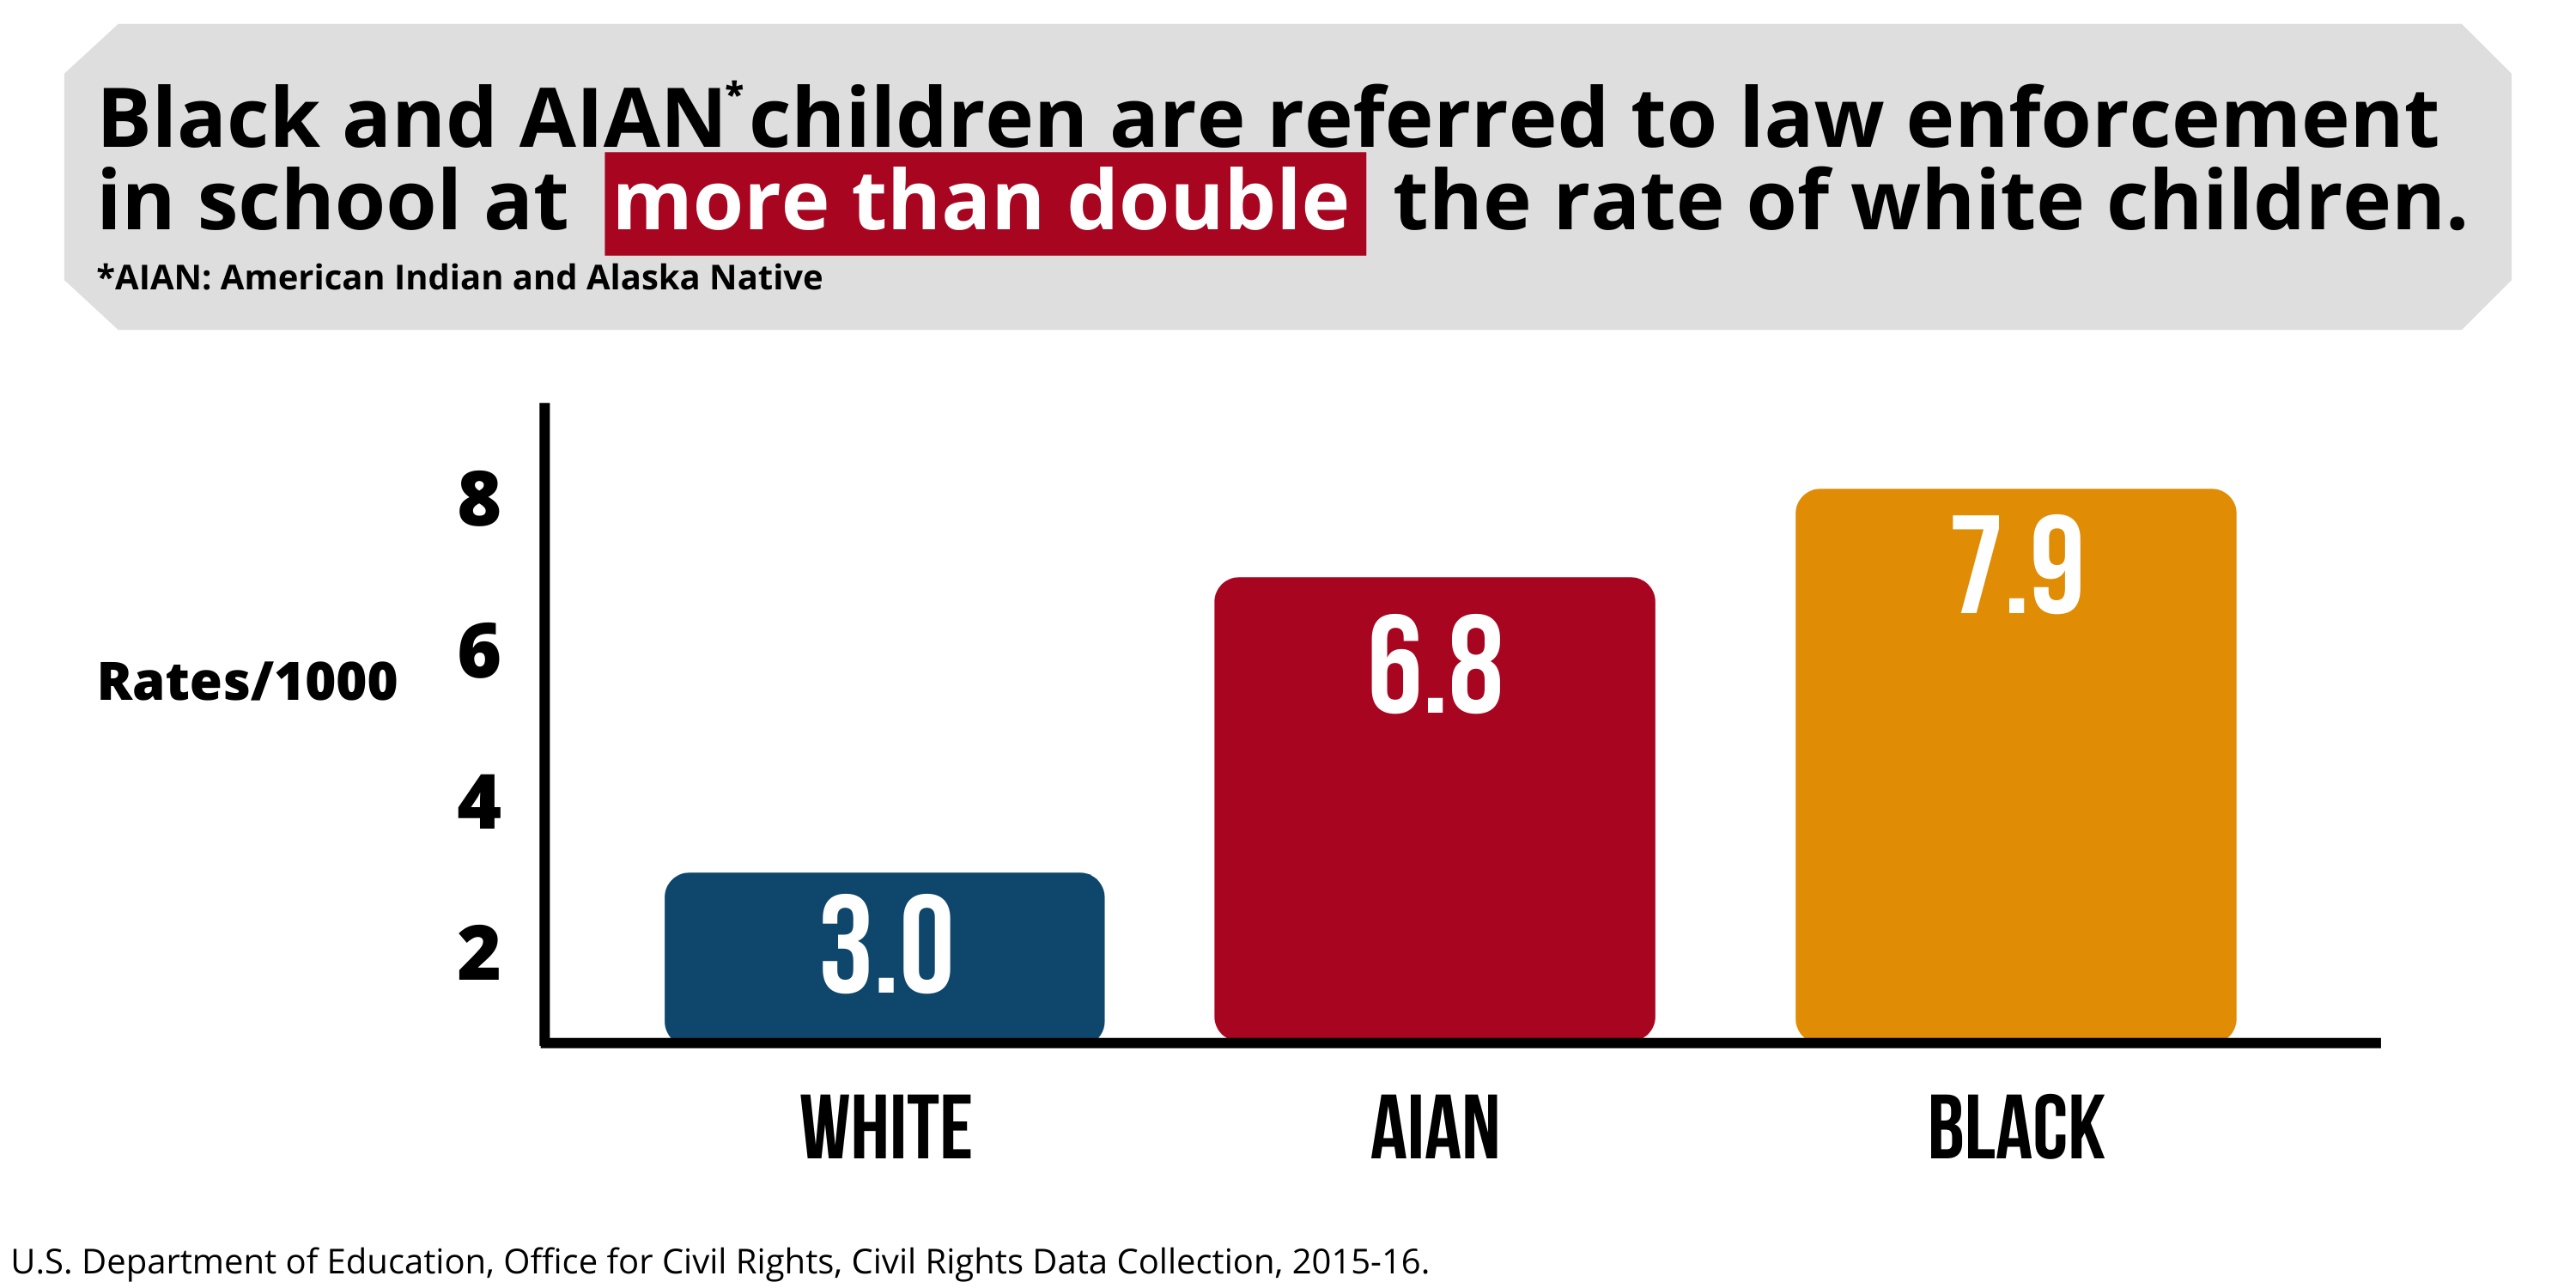 Black and AIAN children are referred to law enforcement in school at more than double the rate of white children.